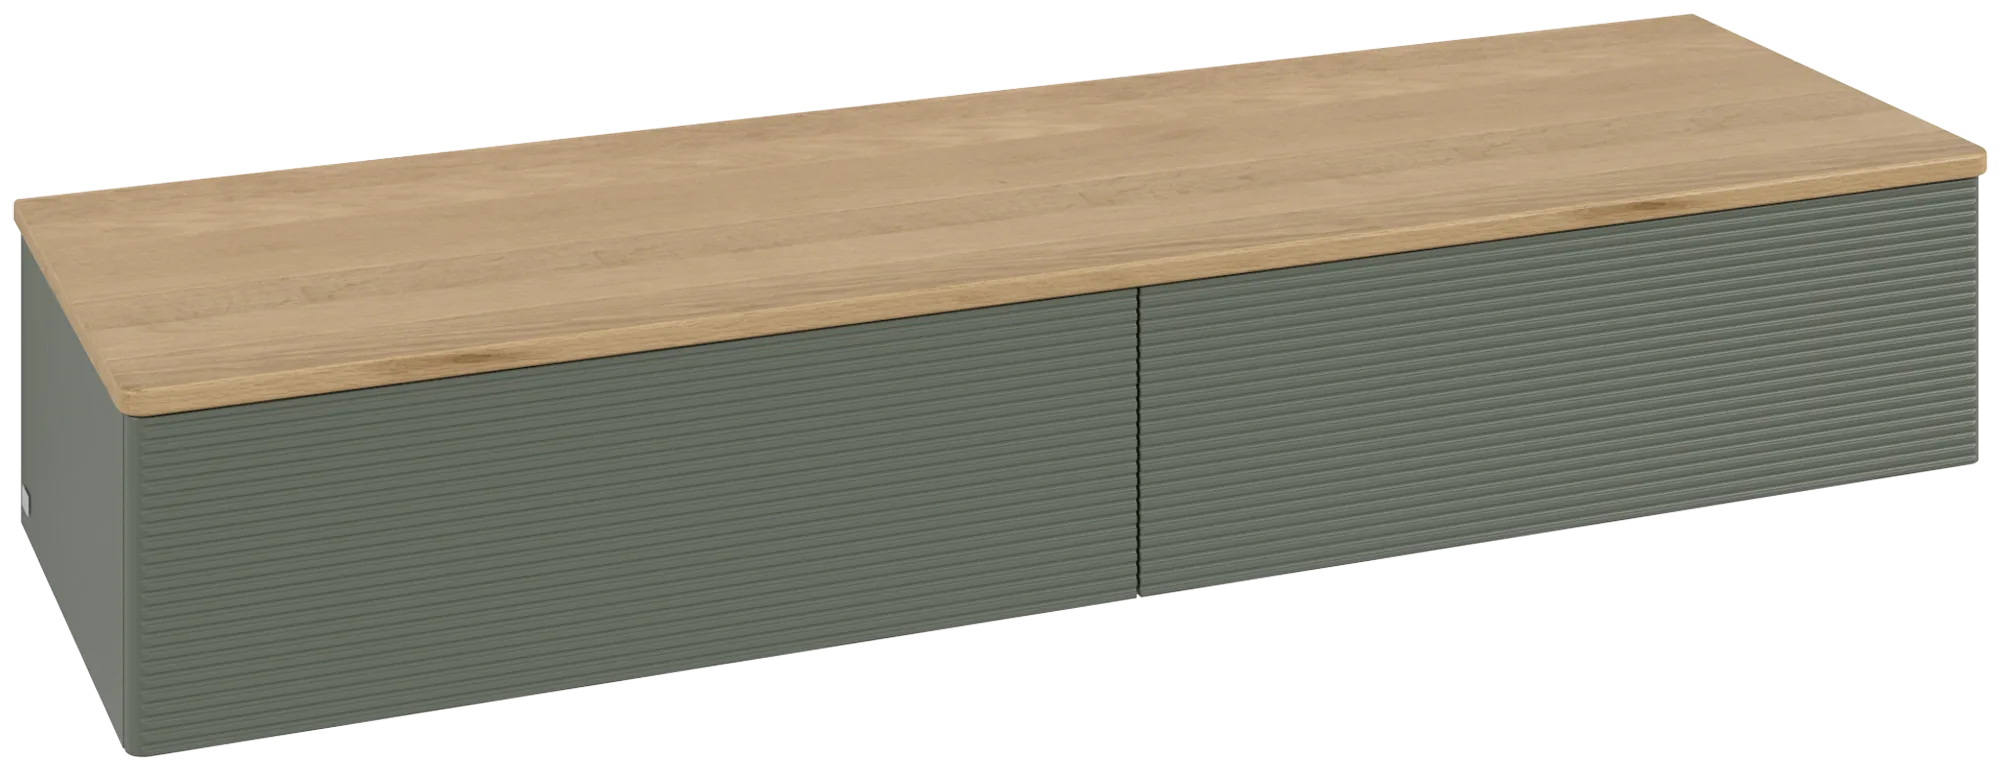 Picture of VILLEROY BOCH Antao Sideboard, 2 pull-out compartments, 1600 x 268 x 500 mm, Front with grain texture, Leaf Green Matt Lacquer / Honey Oak #K42101HL